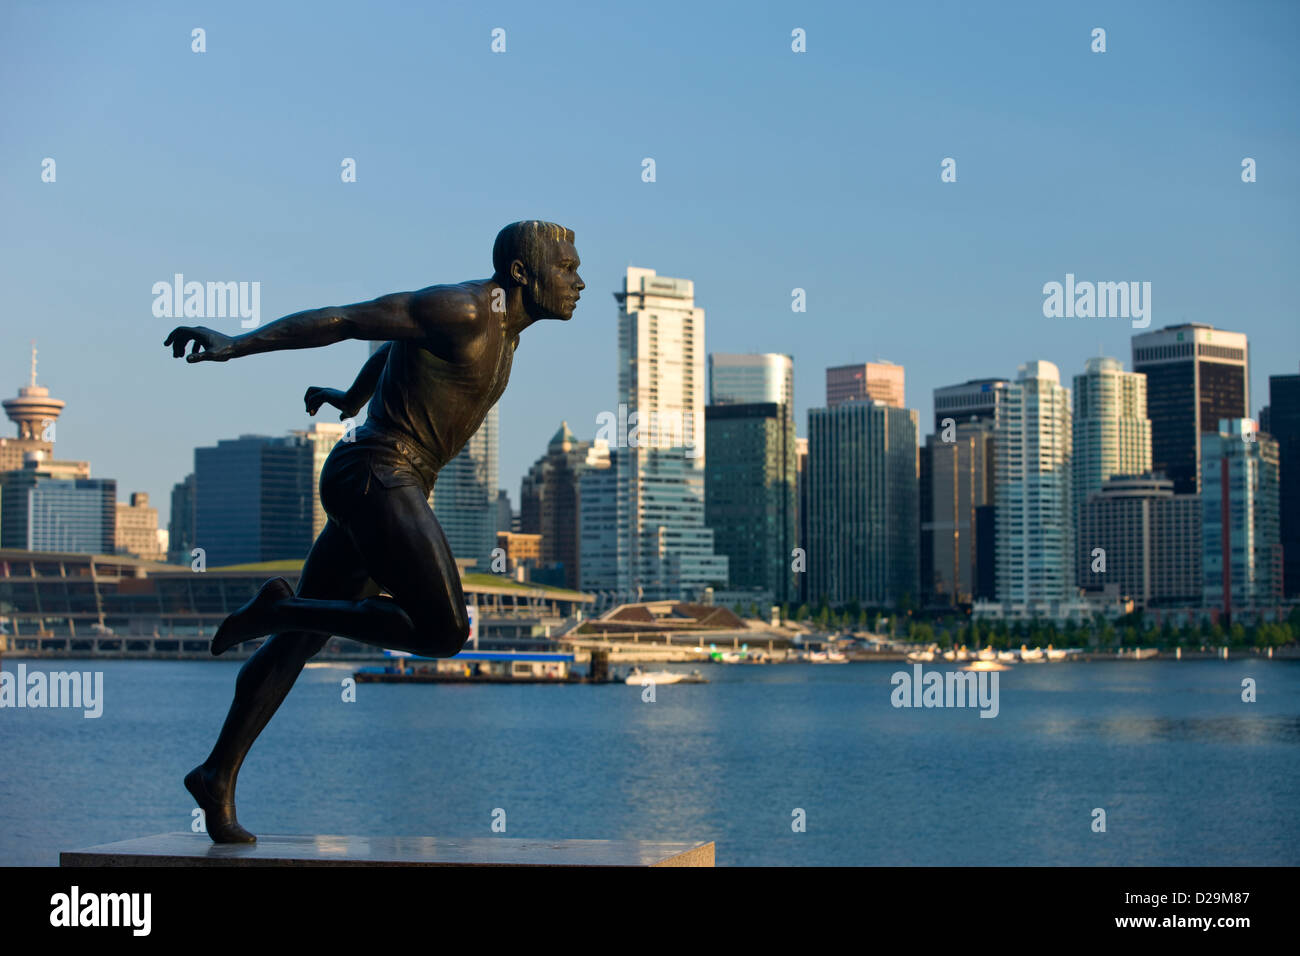 HARRY WINSTON JEROME STATUE STANLEY PARK DOWNTOWN SKYLINE VANCOUVER BRITISH COLUMBIA CANADA Stock Photo